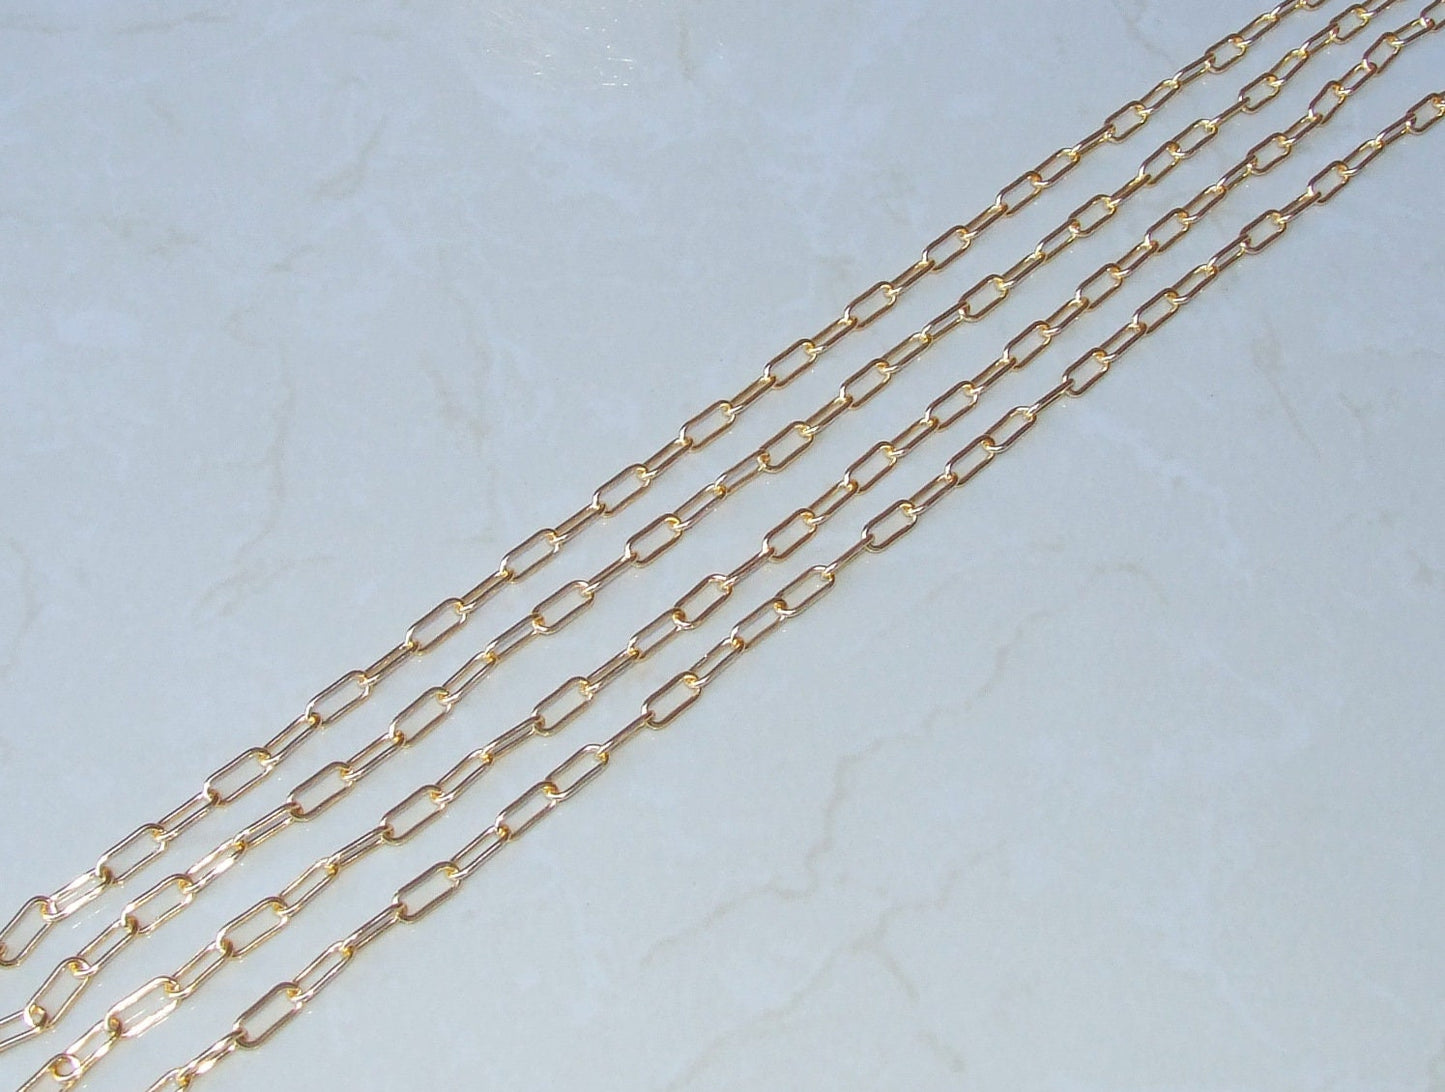 Paper Clip Chain, Oval C Link Cable Chain, Jewelry Chain, Necklace Chain, Body Chain, Bulk Chain, Jewelry Supplies, 16mm x 7mm, 01B-G